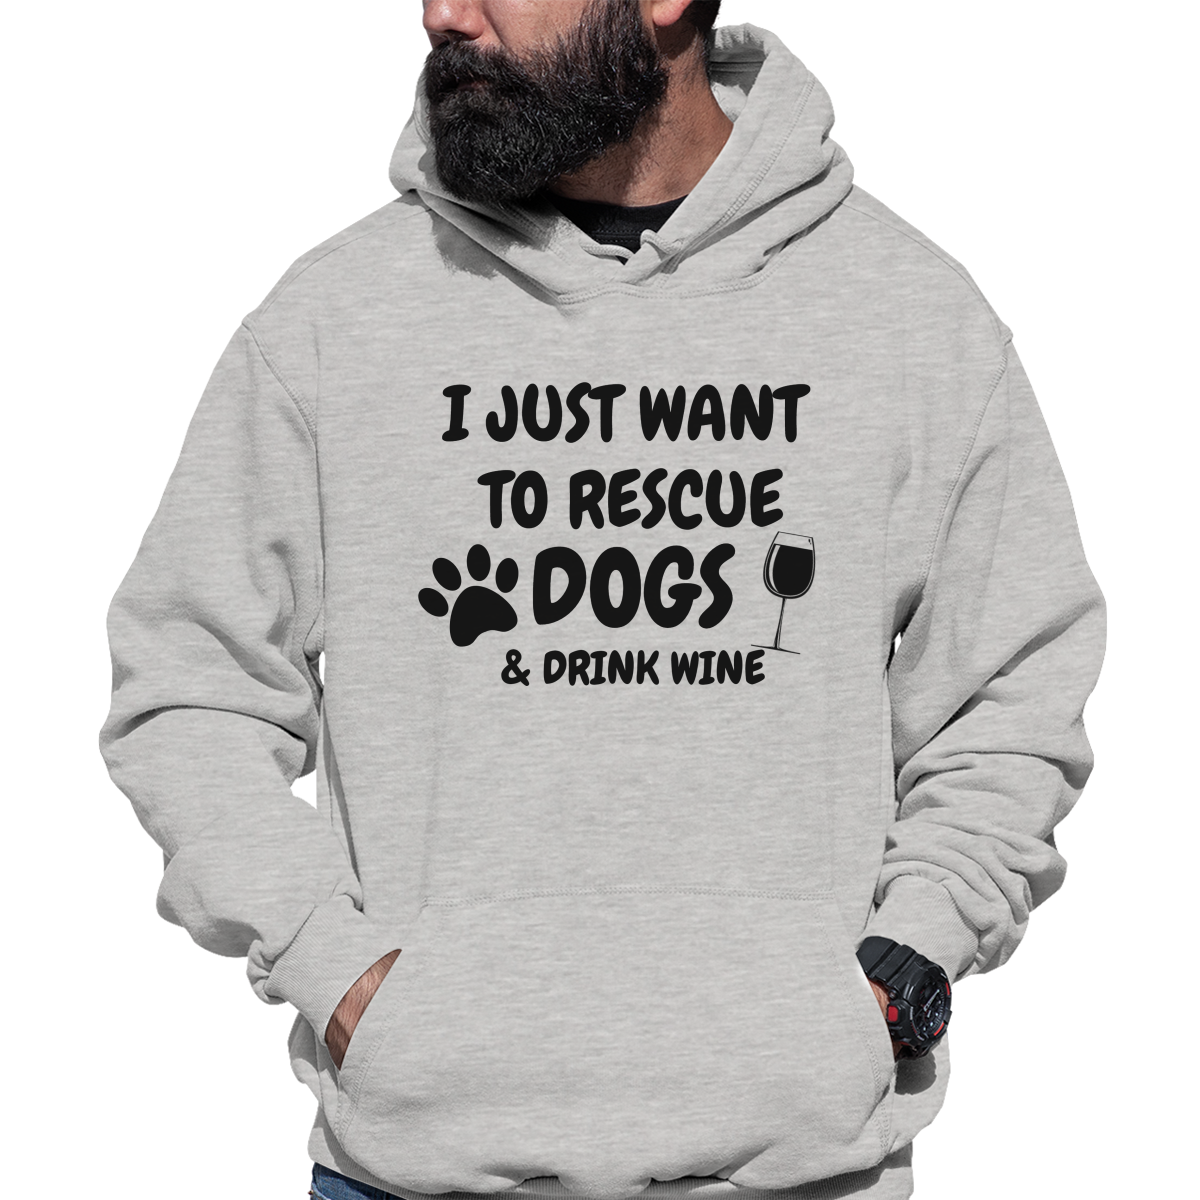 Dogs and Drink Wine Unisex Hoodie | Gray